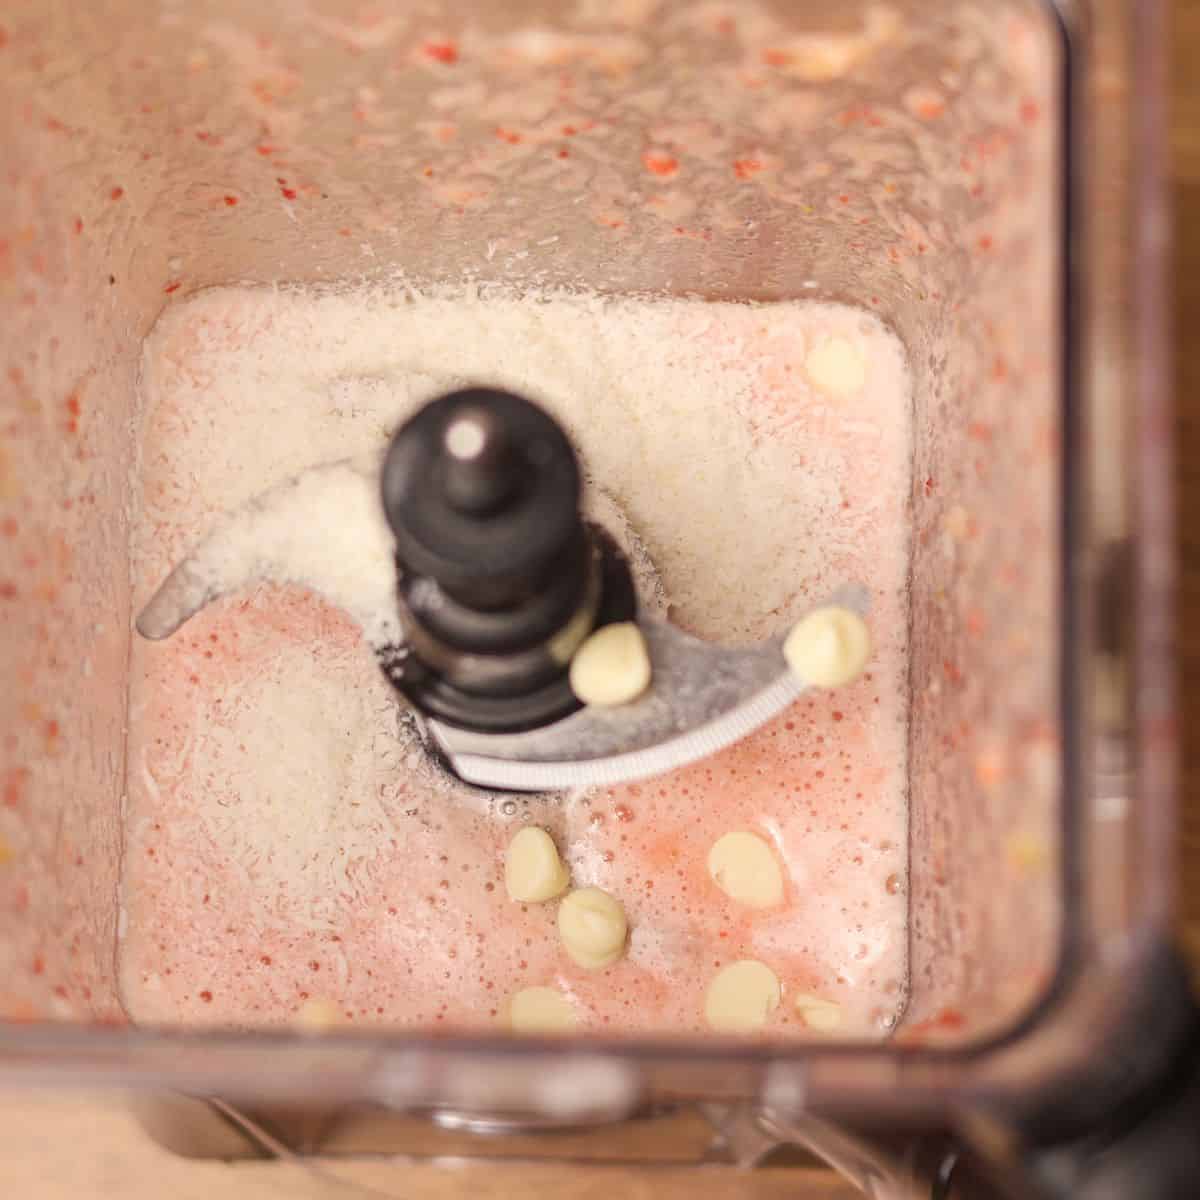 Overhead view of a blender with a creamy pink mixture topped with white chocolate chips and shredded coconut, indicating a midway point in a smoothie recipe